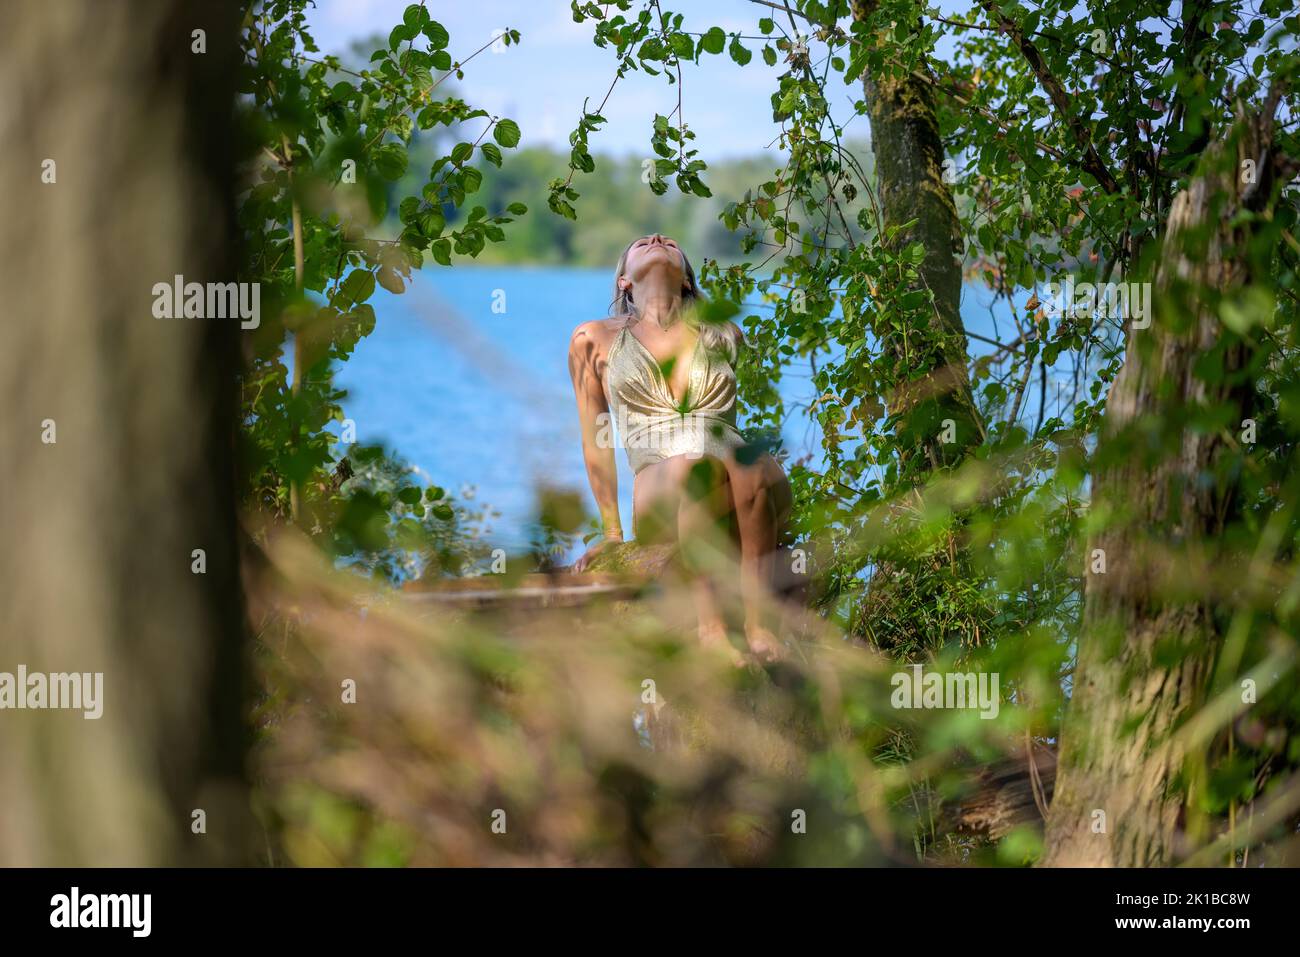 Attractive blond woman wearing a gold gogo dress posing on a tree trunk at the edge of a lake Stock Photo